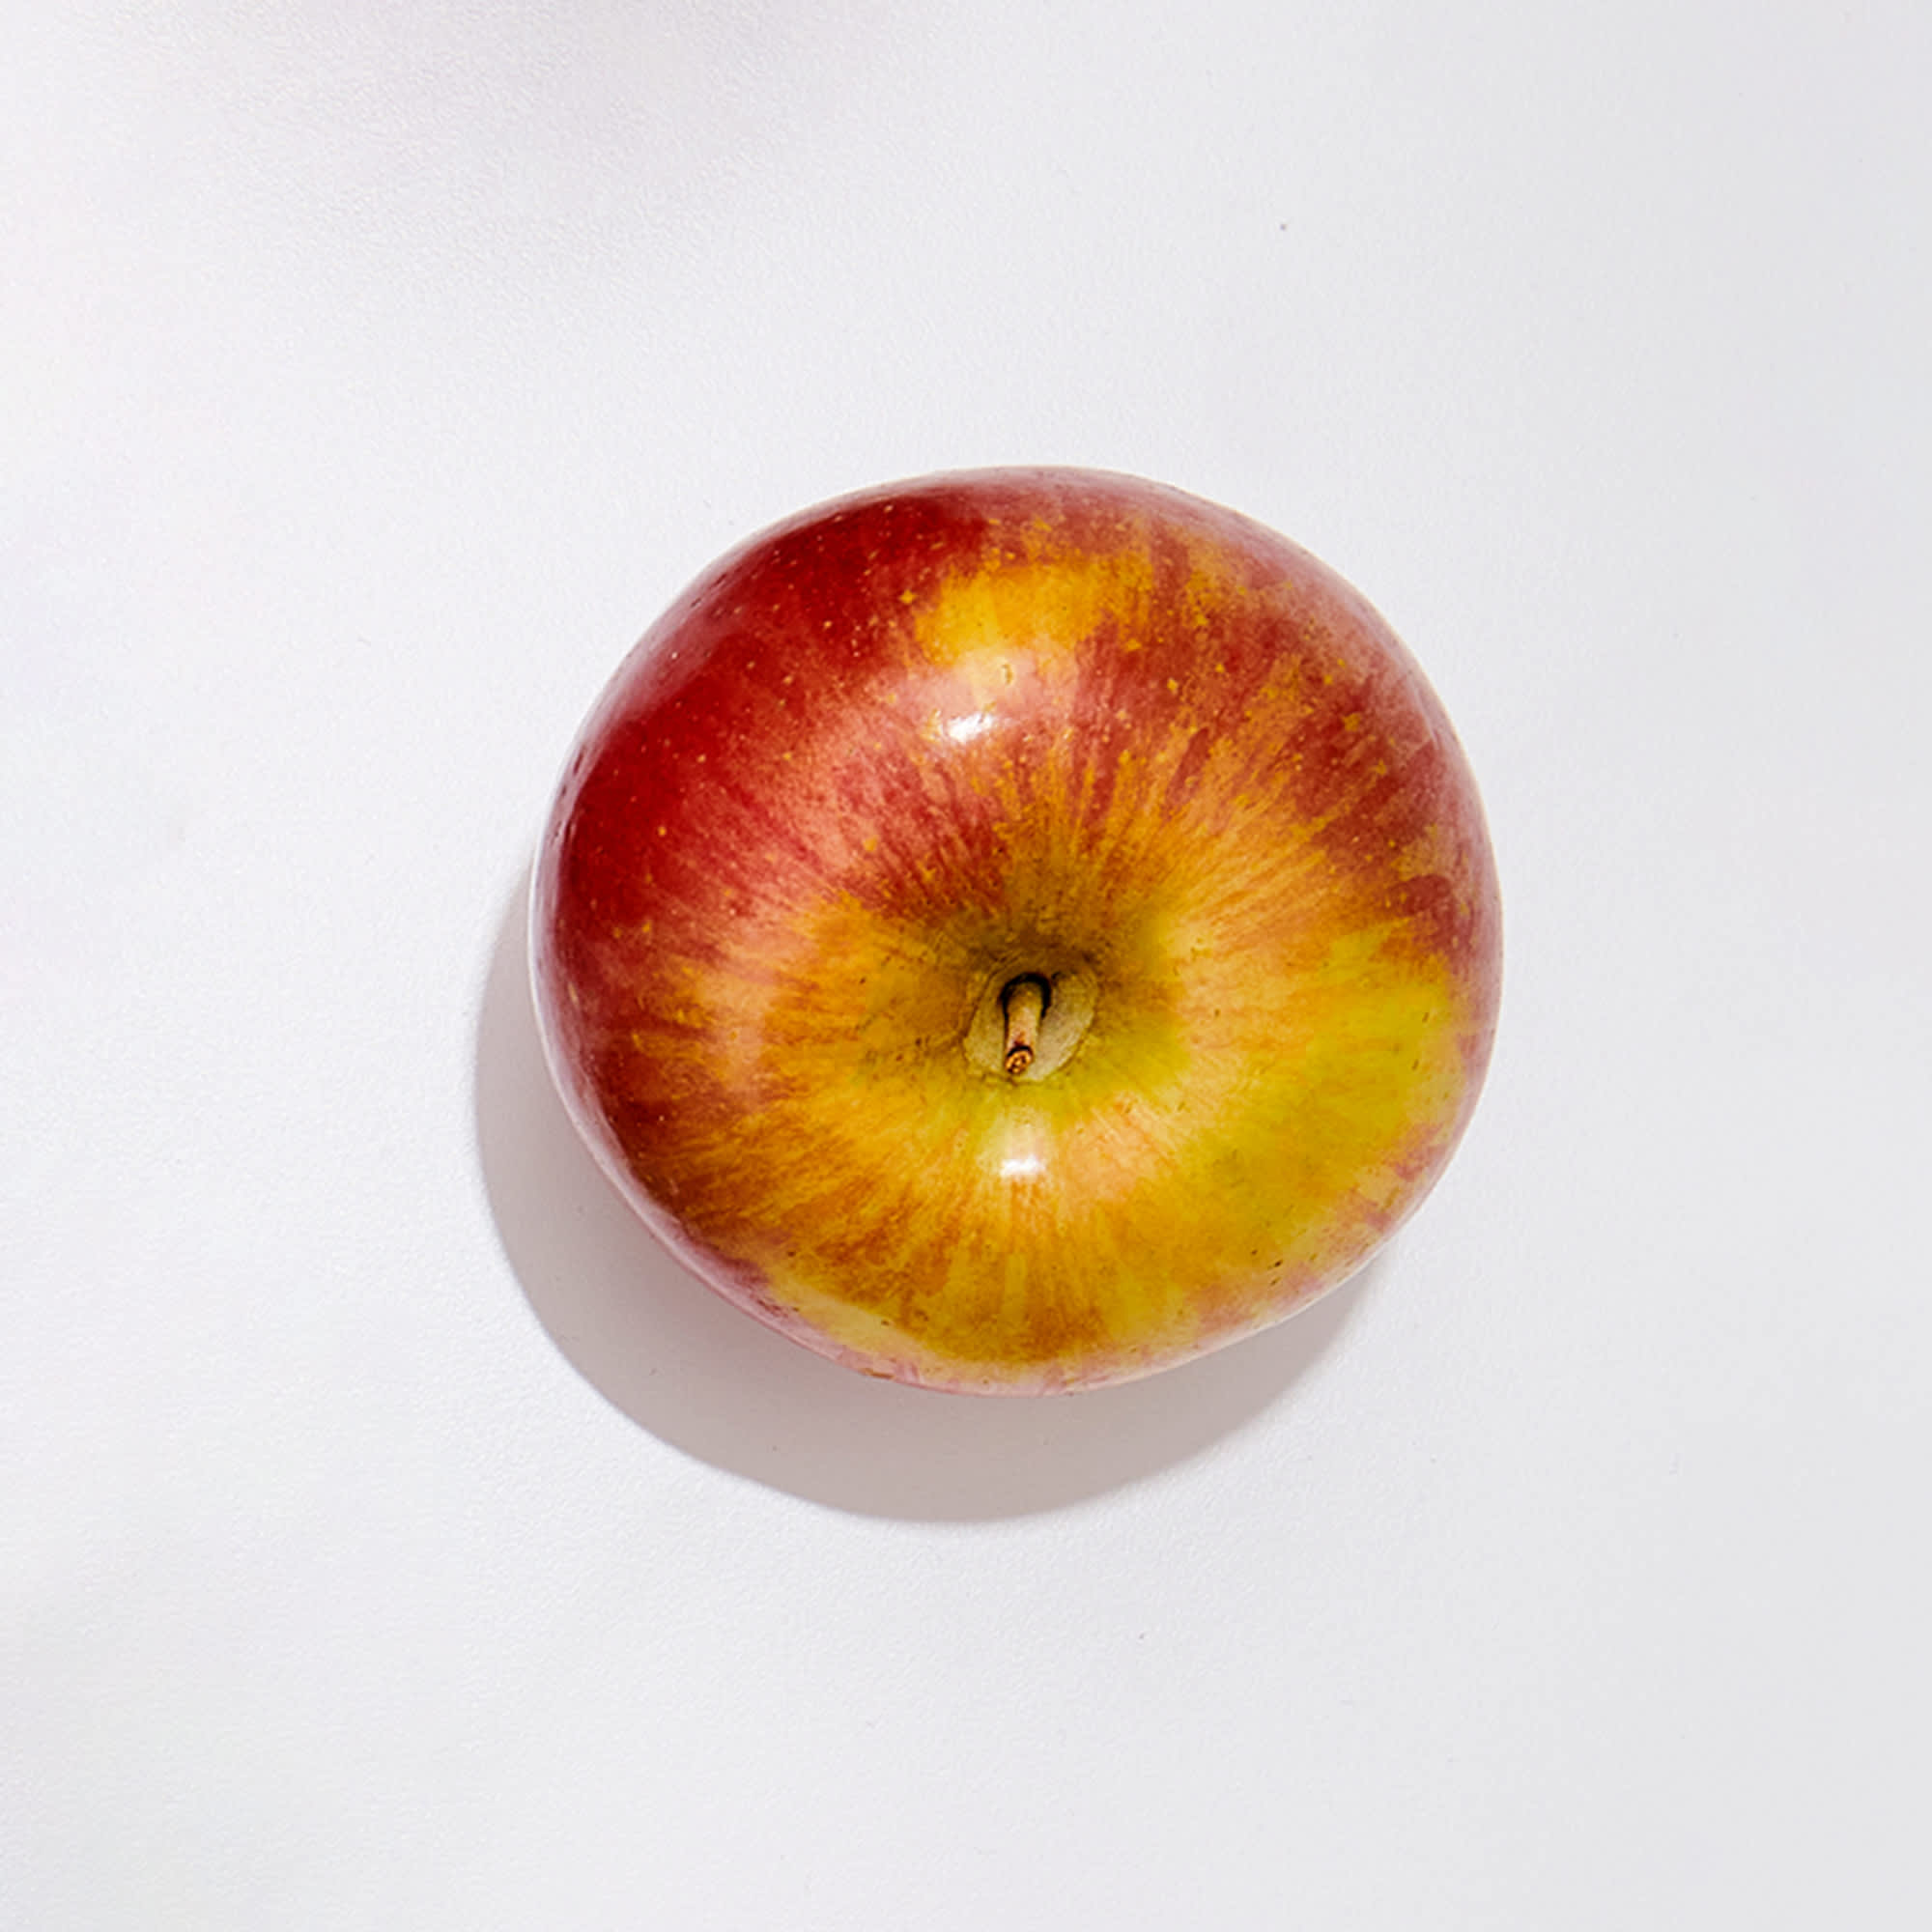 25 Types of Apples to Try This Fall – PureWow